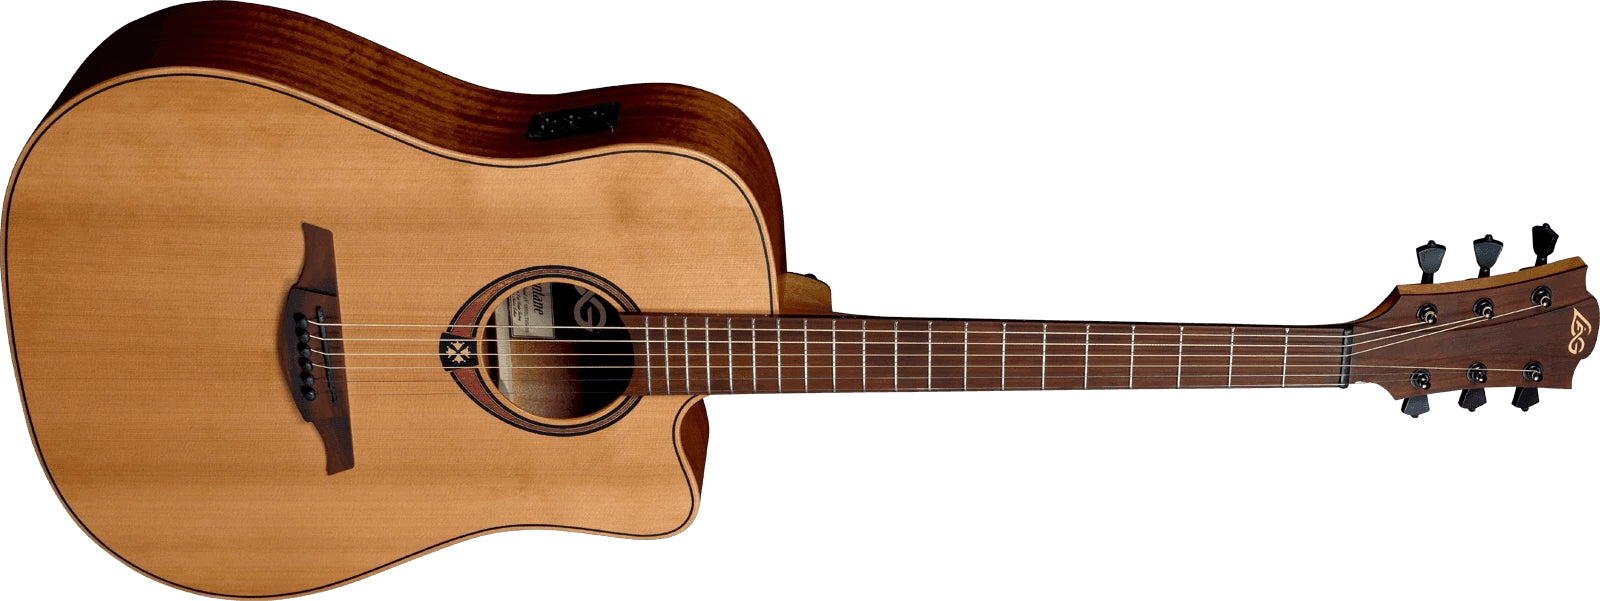 LAG TRAMONTANE 170 T170DCE DREADNOUGHT CUTAWAY ELECTRO, Electro Acoustic Guitar for sale at Richards Guitars.